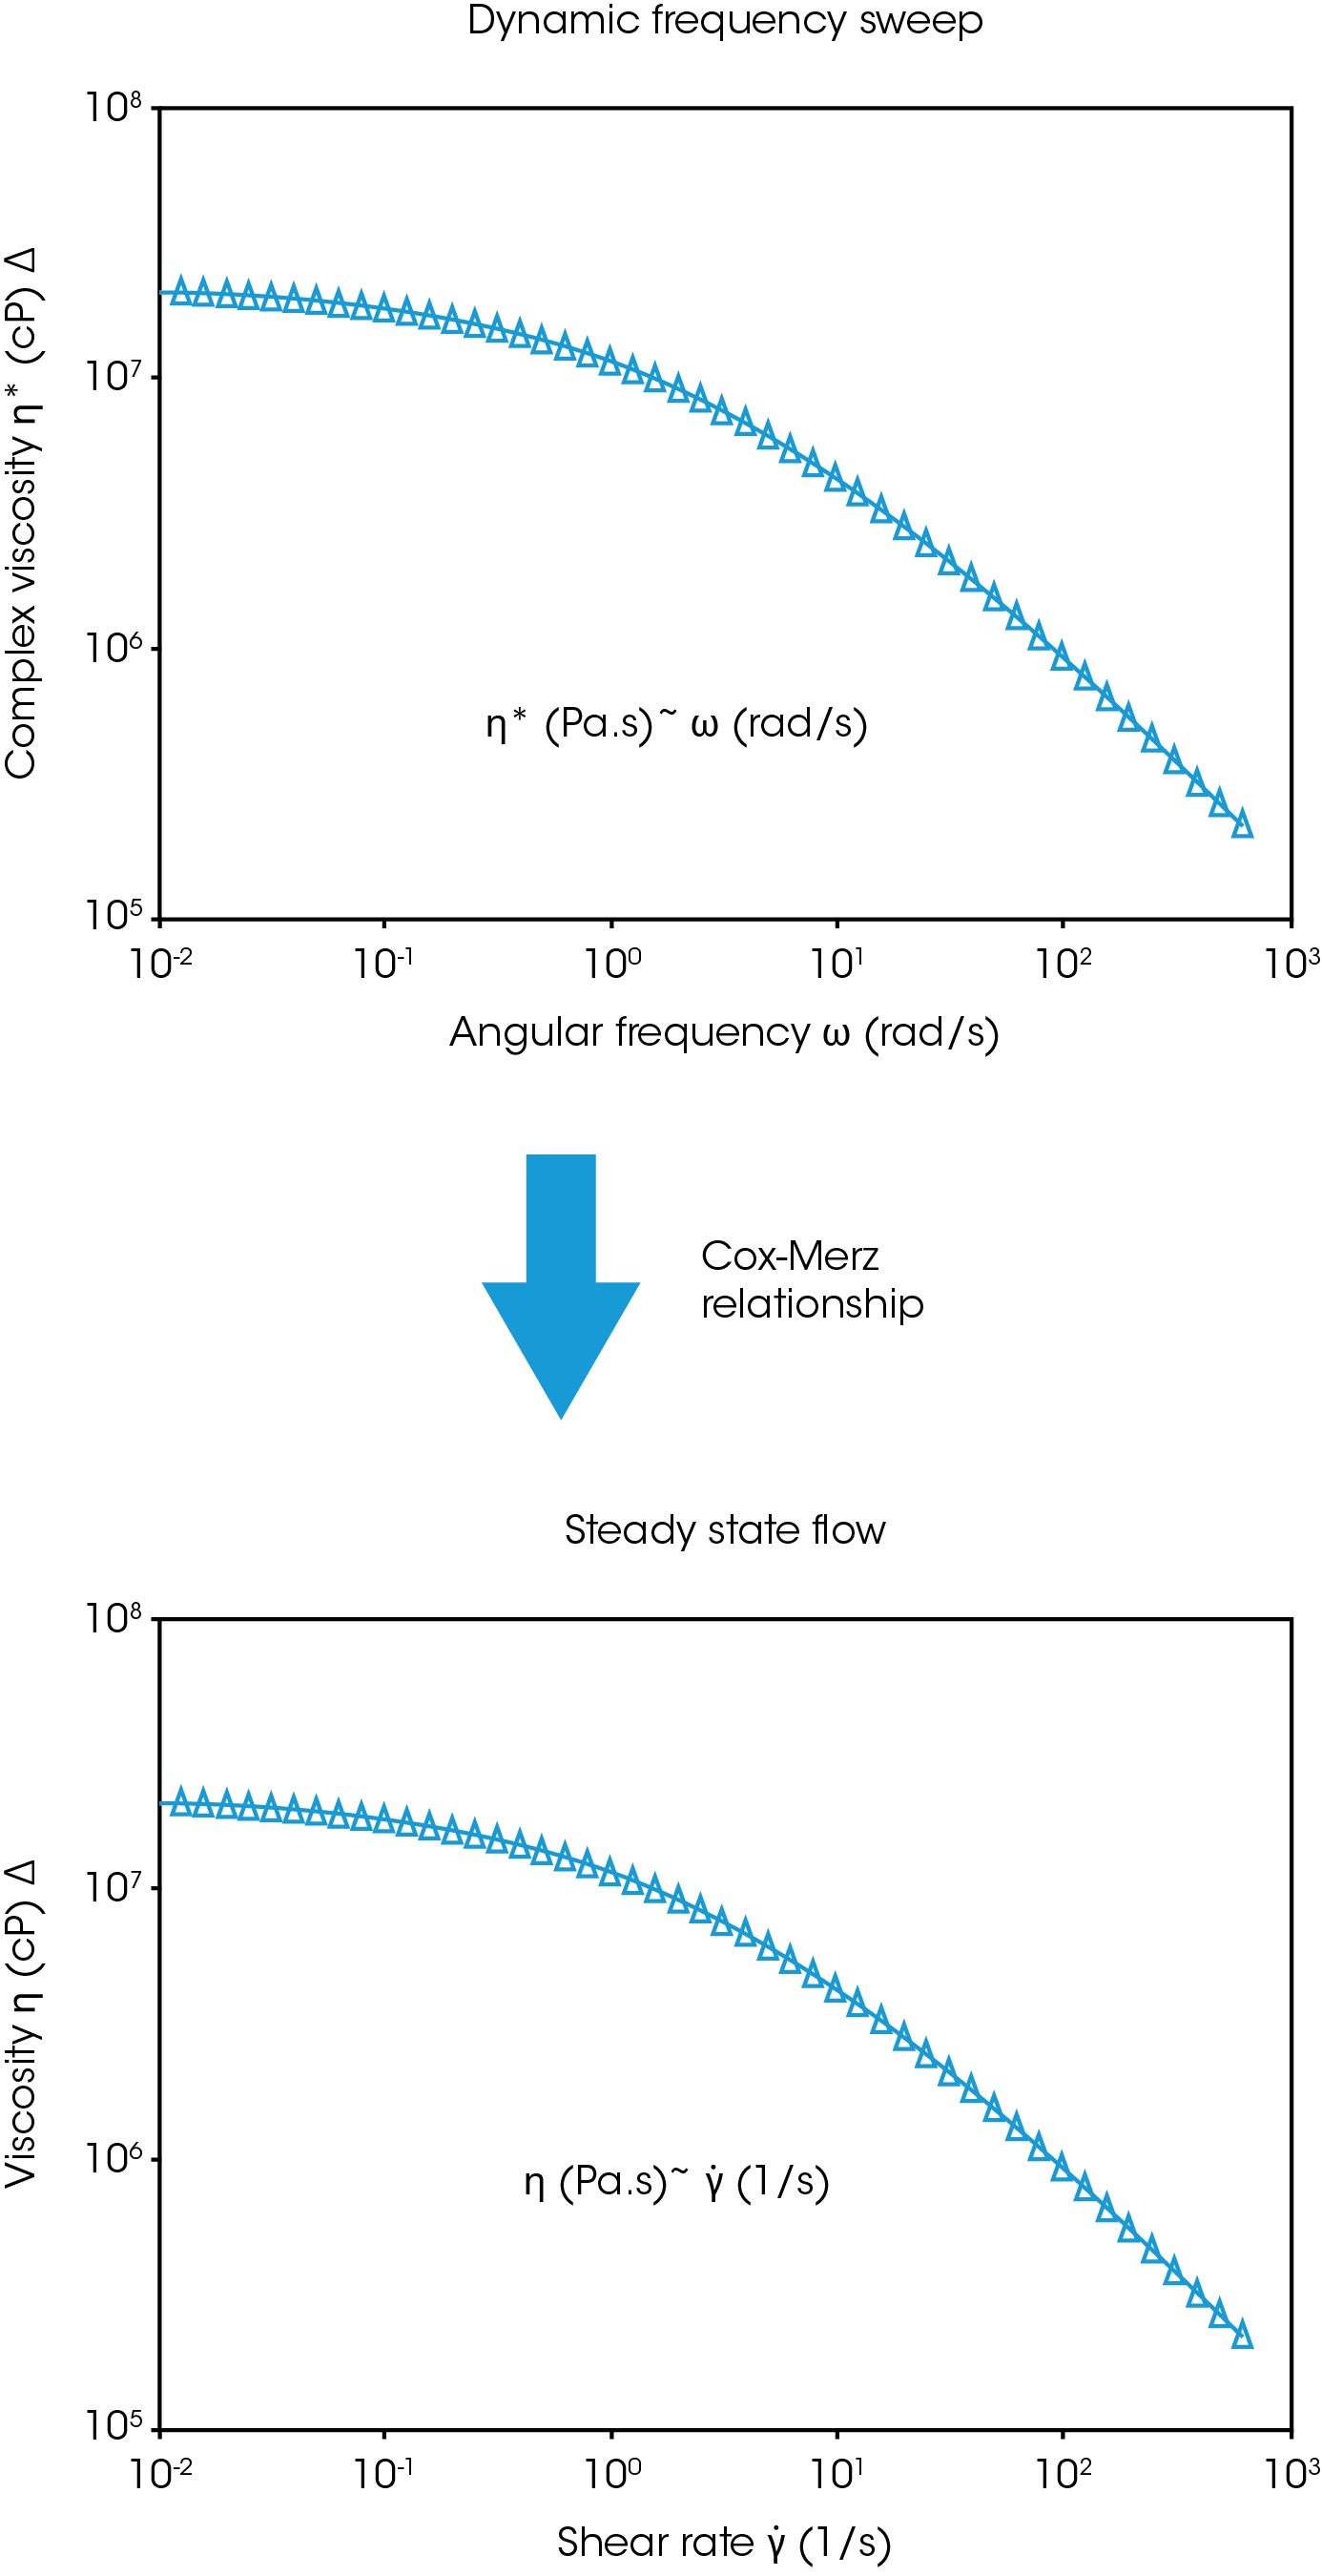 Figure 1. Cox-Merz relationship converting complex viscosity (ƞ*) to steady-shear viscosity (ƞ). Note that ƞ* must be defined as a function of oscillatory angular frequency expressed in rad/s to obtain ƞ as a function of shear rate in s-1.